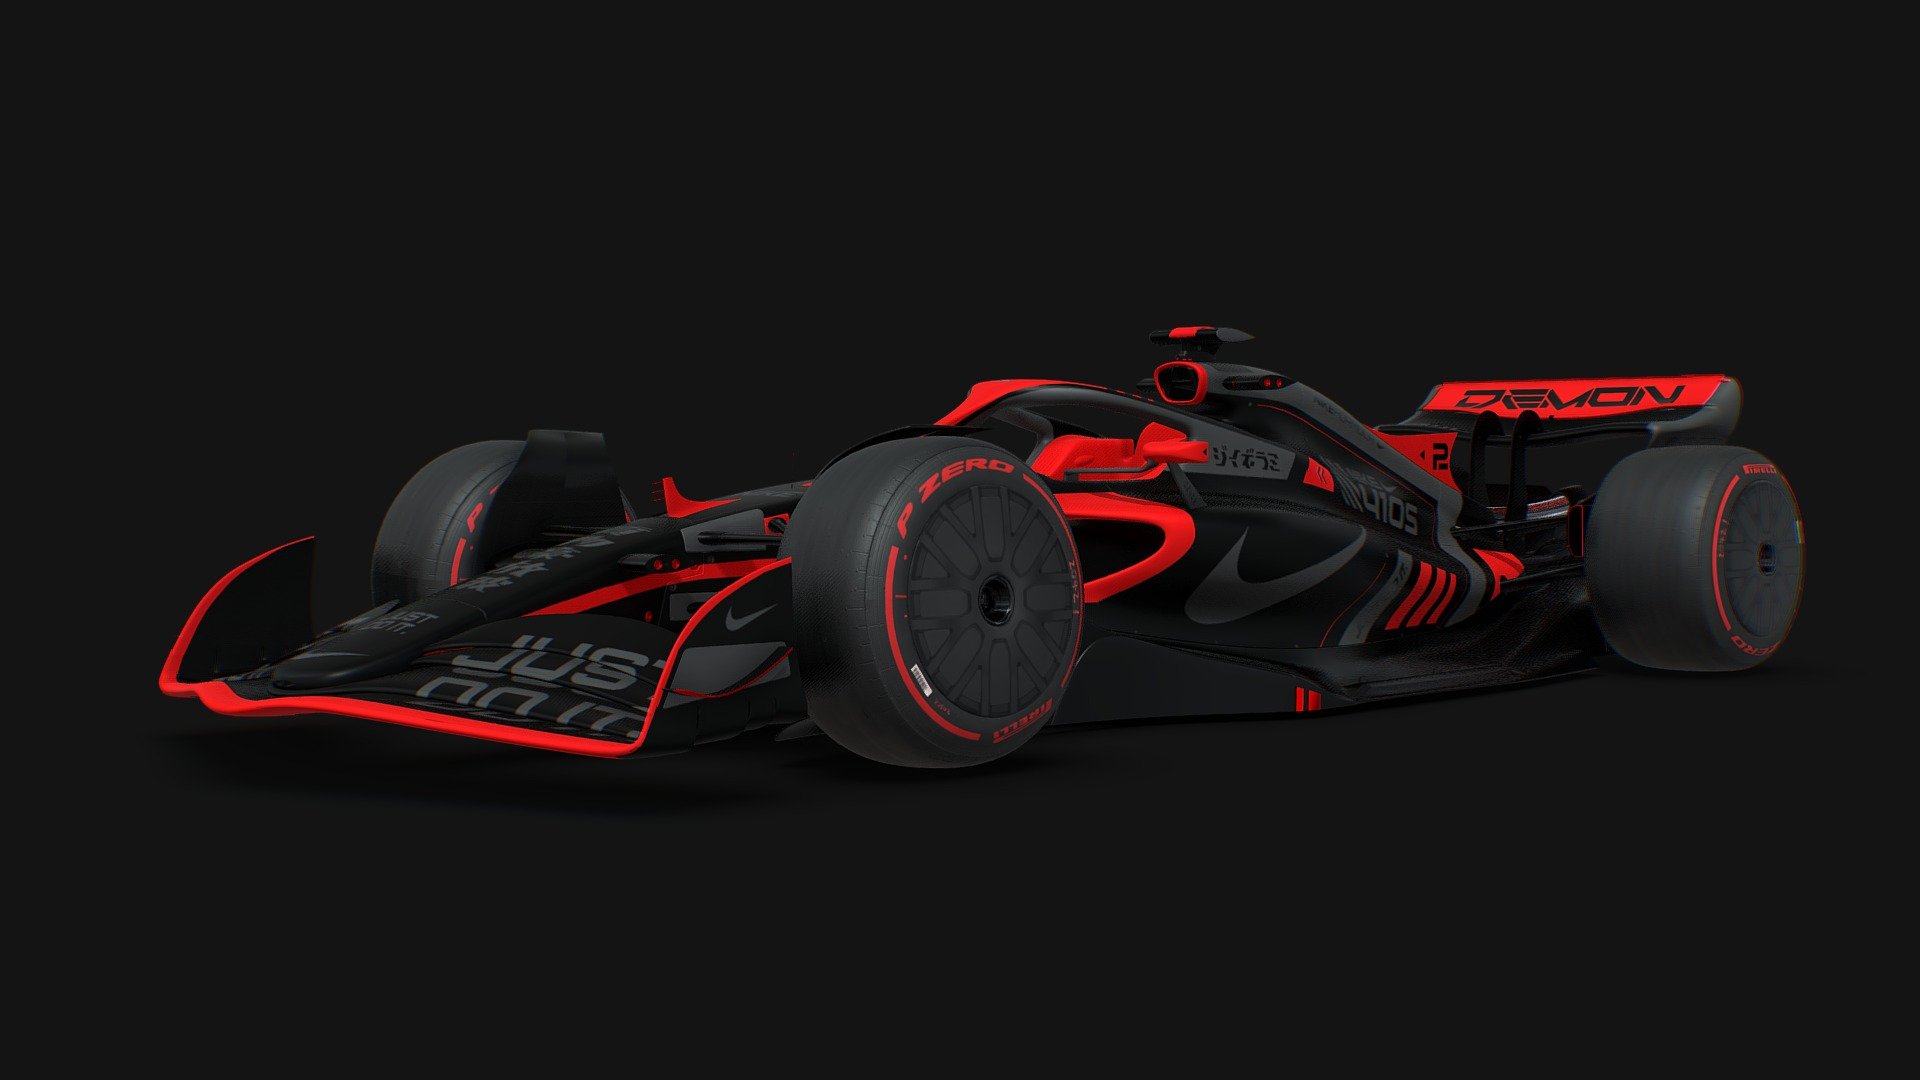 NIKE DEMON

Discover the DEMON skin for the Formula 1 model on Formula 1 game. 

Find the other Nike Esport Shop skins on my profile.

Disclaimer : Nike Esport Shop is a conceptual project that consists of imagining the future skins made by the equipment manufacturer NIKE in various major esports games.

Socials networks : 



Twitter : https://twitter.com/peiksprod



Instagram : https://www.instagram.com/peiksprod



Youtube : https://www.youtube.com/c/PeiksProd



Behance : https://www.behance.net/peiksprod


 - NIKE DEMON - Formula 1 (F1) - 3D model by peiks 3d model